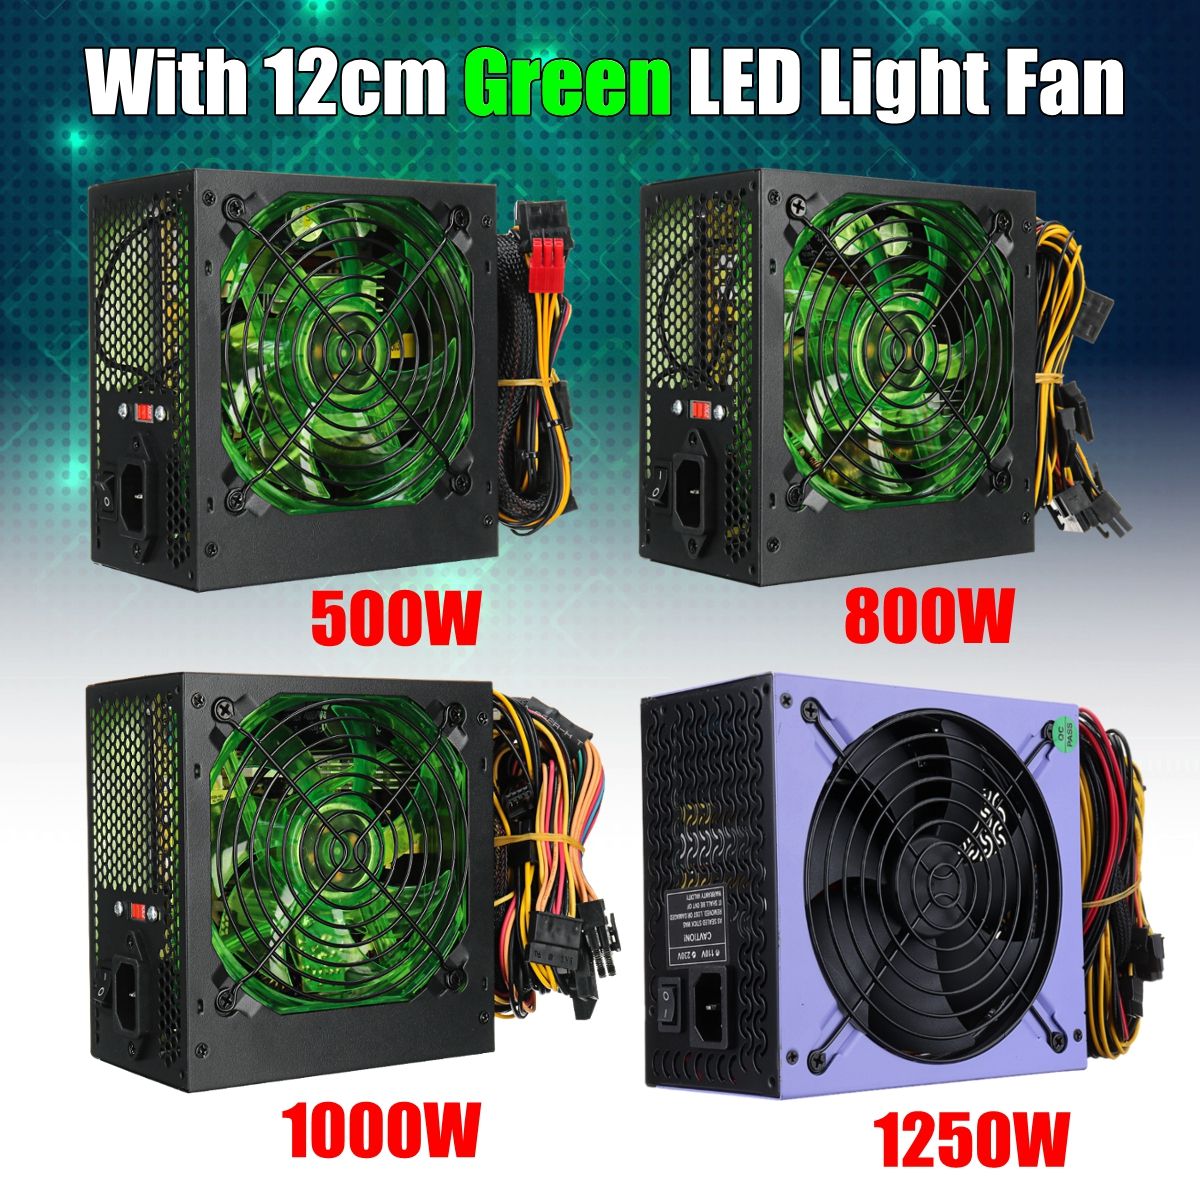 1000W-Power-Supply-120mm-LED-Fan-24-Pin-PCI-SATA-ATX-12V-Computer-Power-Supply-for-PC-Compurter-Case-1633923